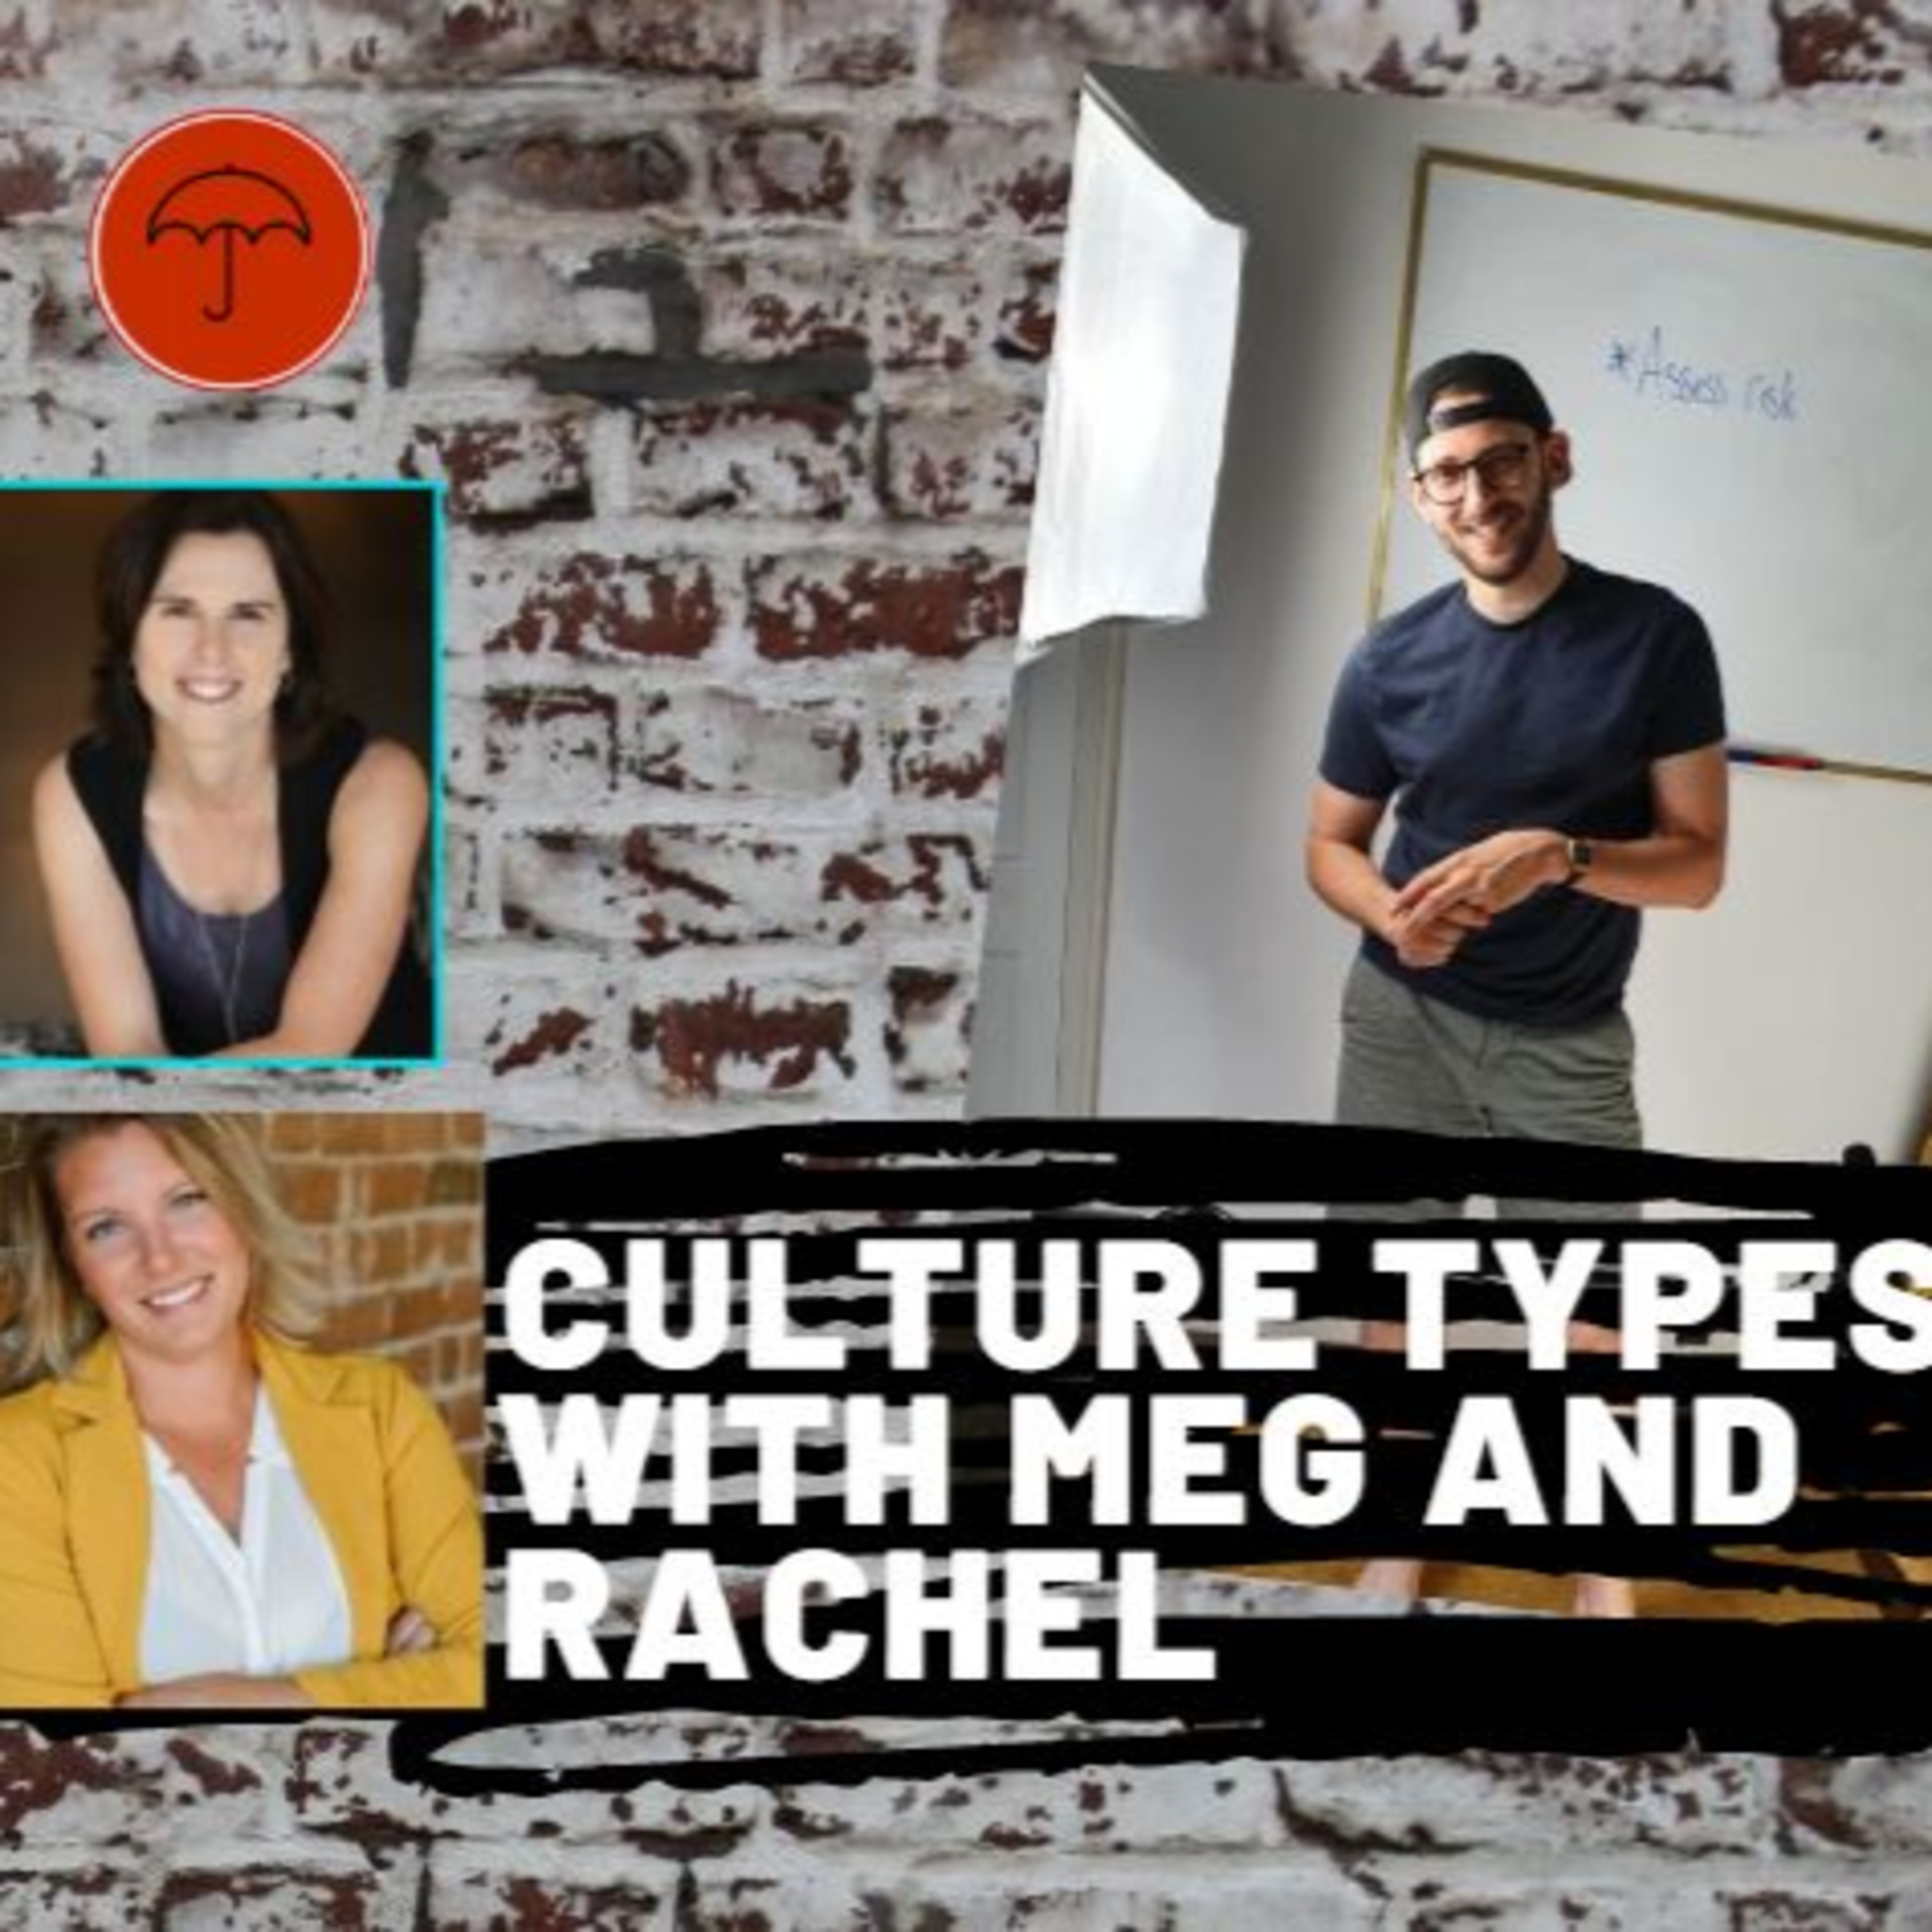 Culture Types with Meg and Rachel